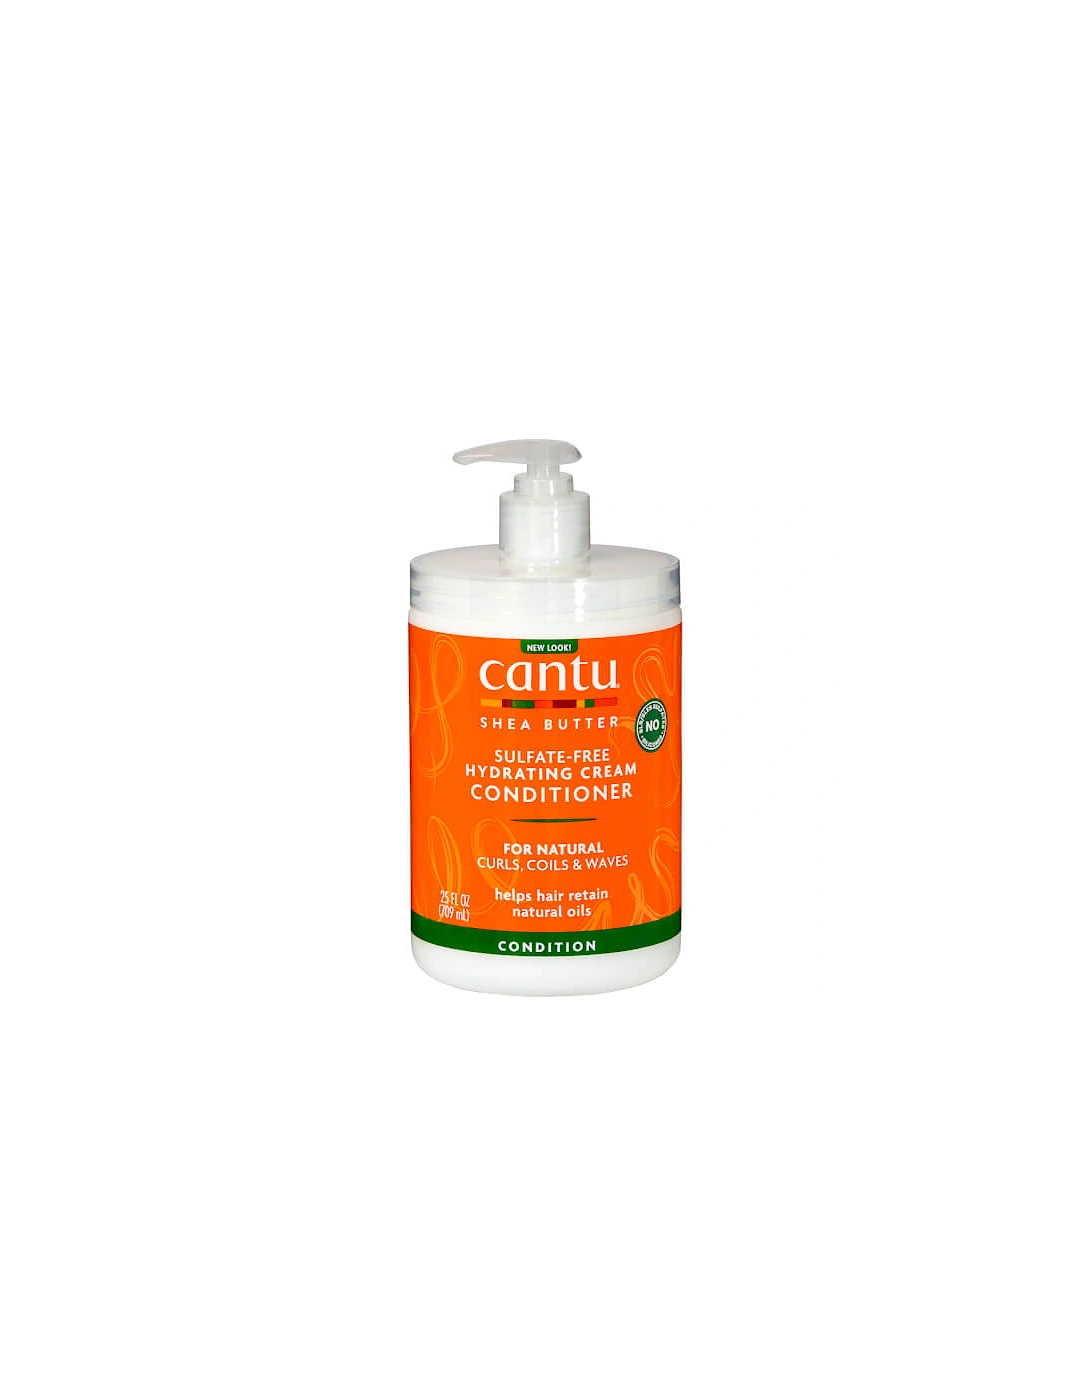 Shea Butter for Natural Hair Hydrating Cream Conditioner – Salon Size 24 oz - Cantu, 2 of 1